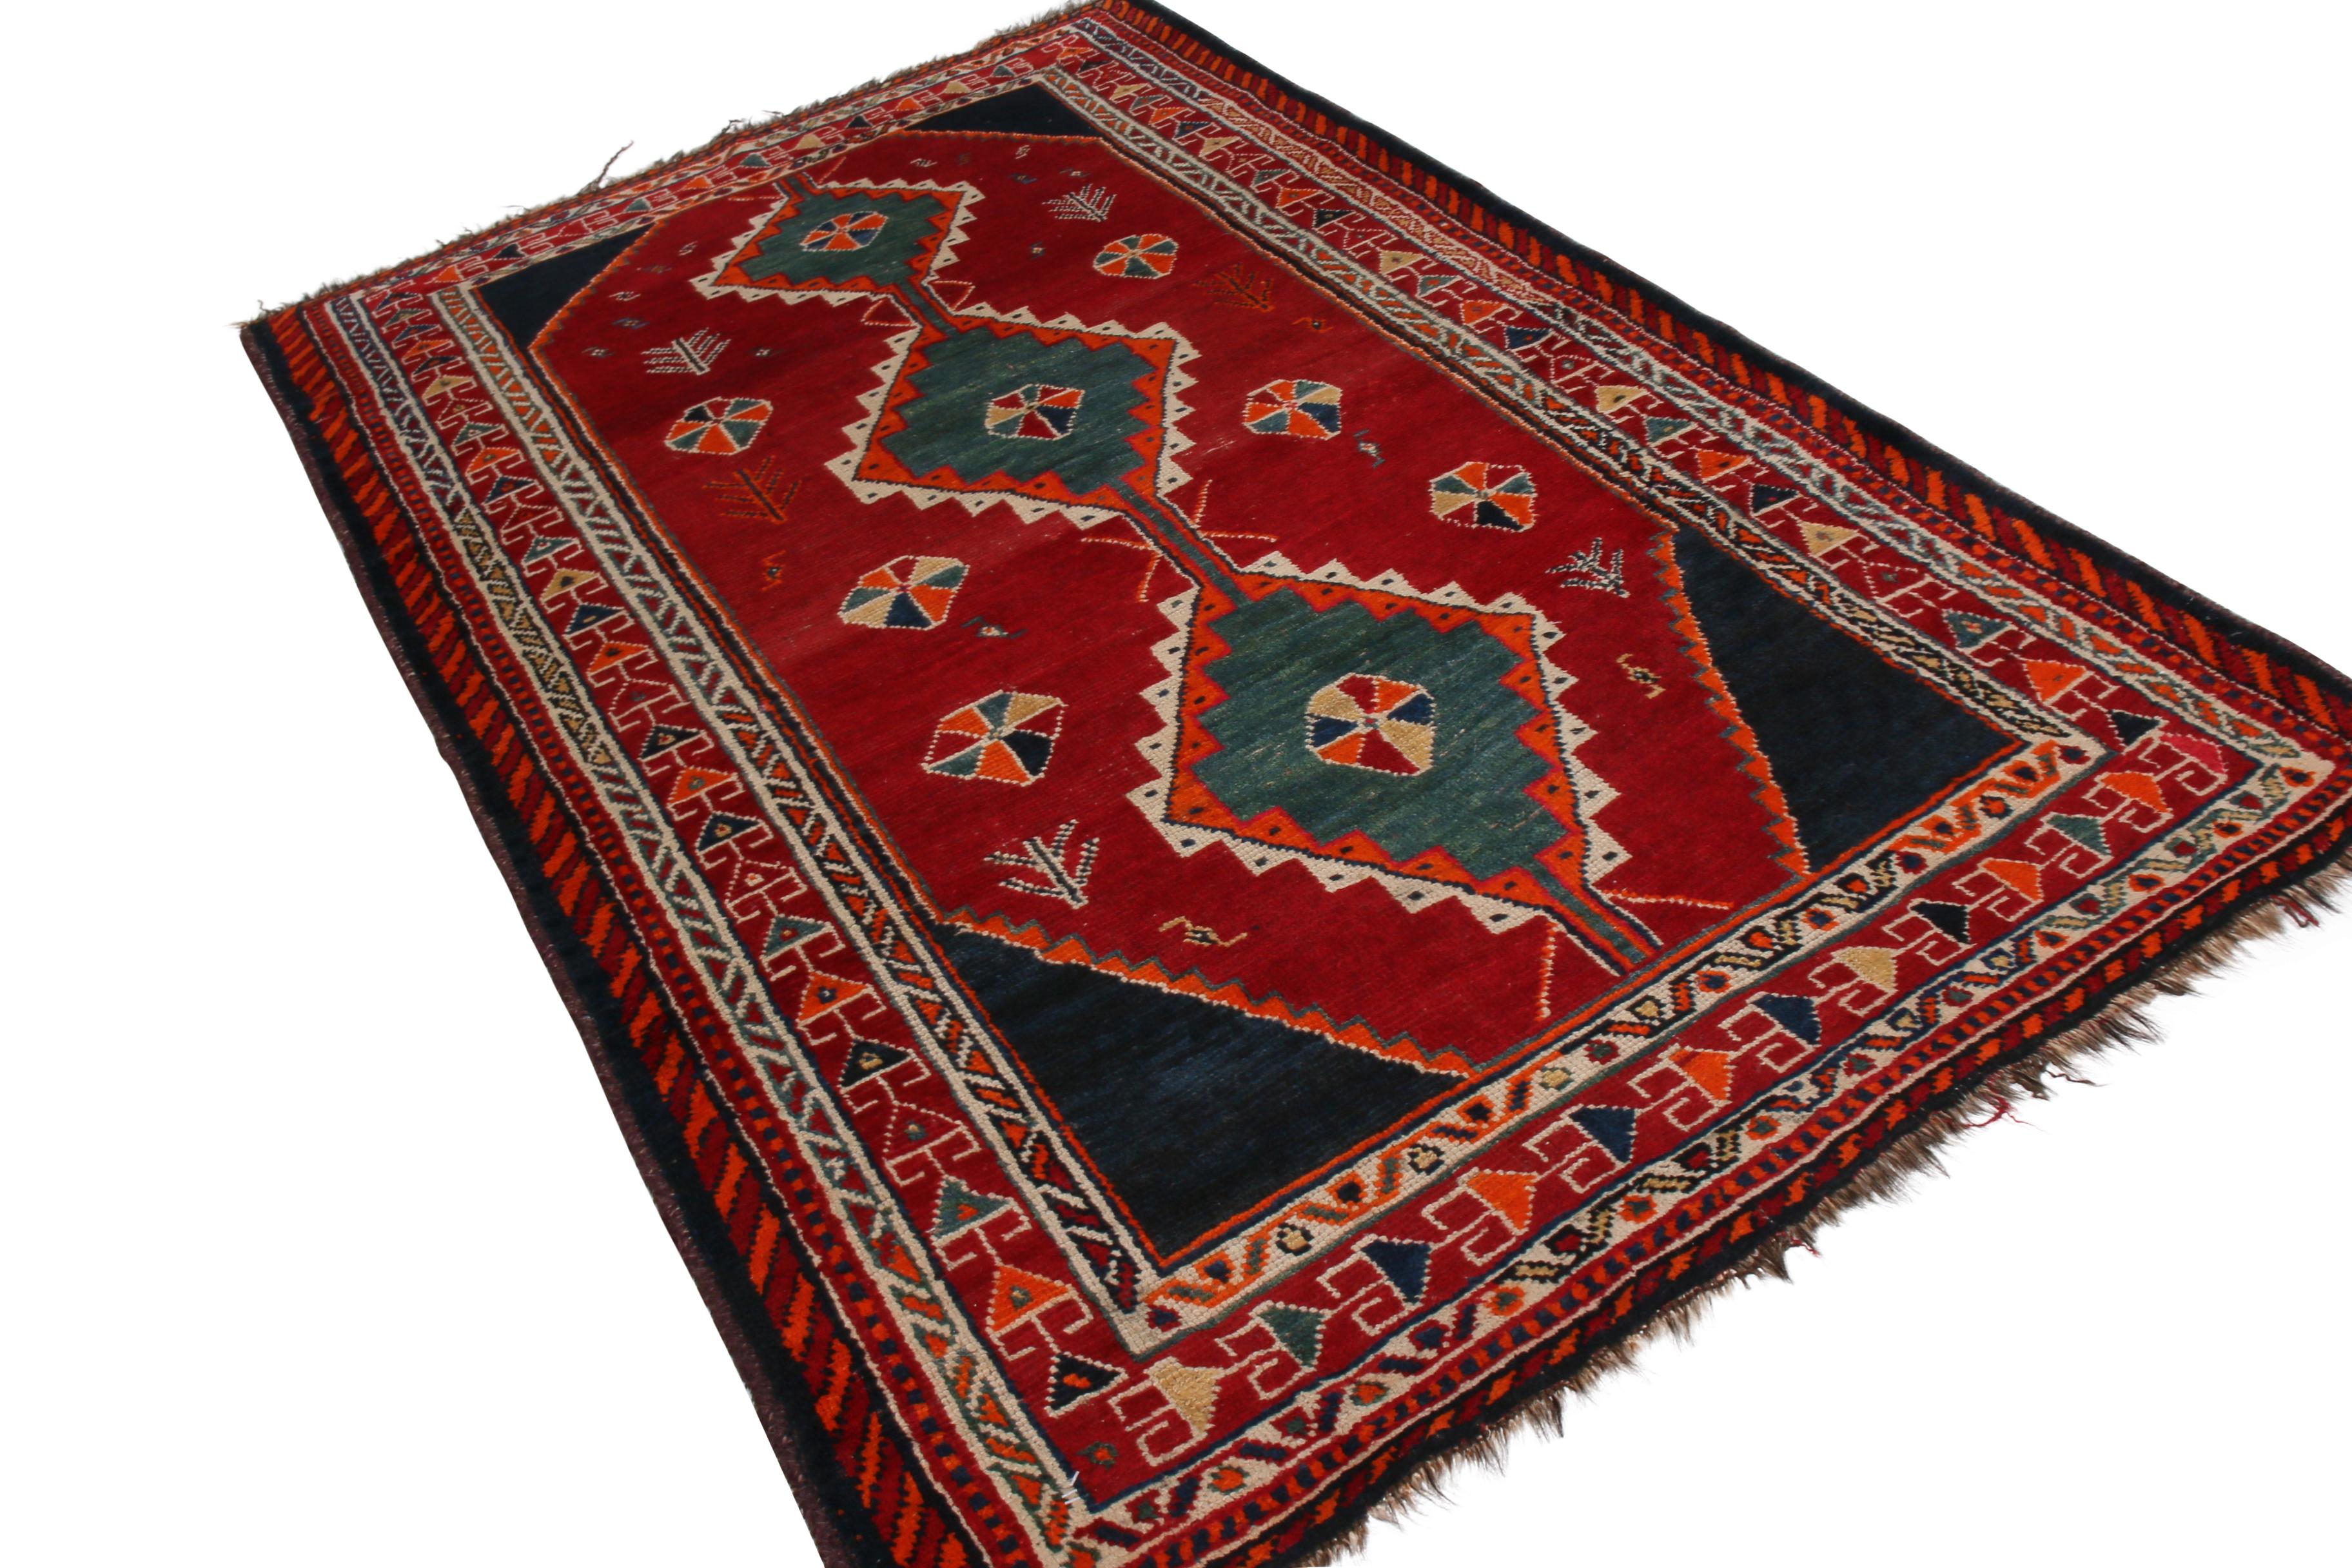 Hand knotted in wool originating between 1900-1910, this antique Gabbeh Persian rug hosts transitional elements with a variety of Classic, rich colorways. The variety of fabulous blue and red in the geometry of the field and border alike draws the